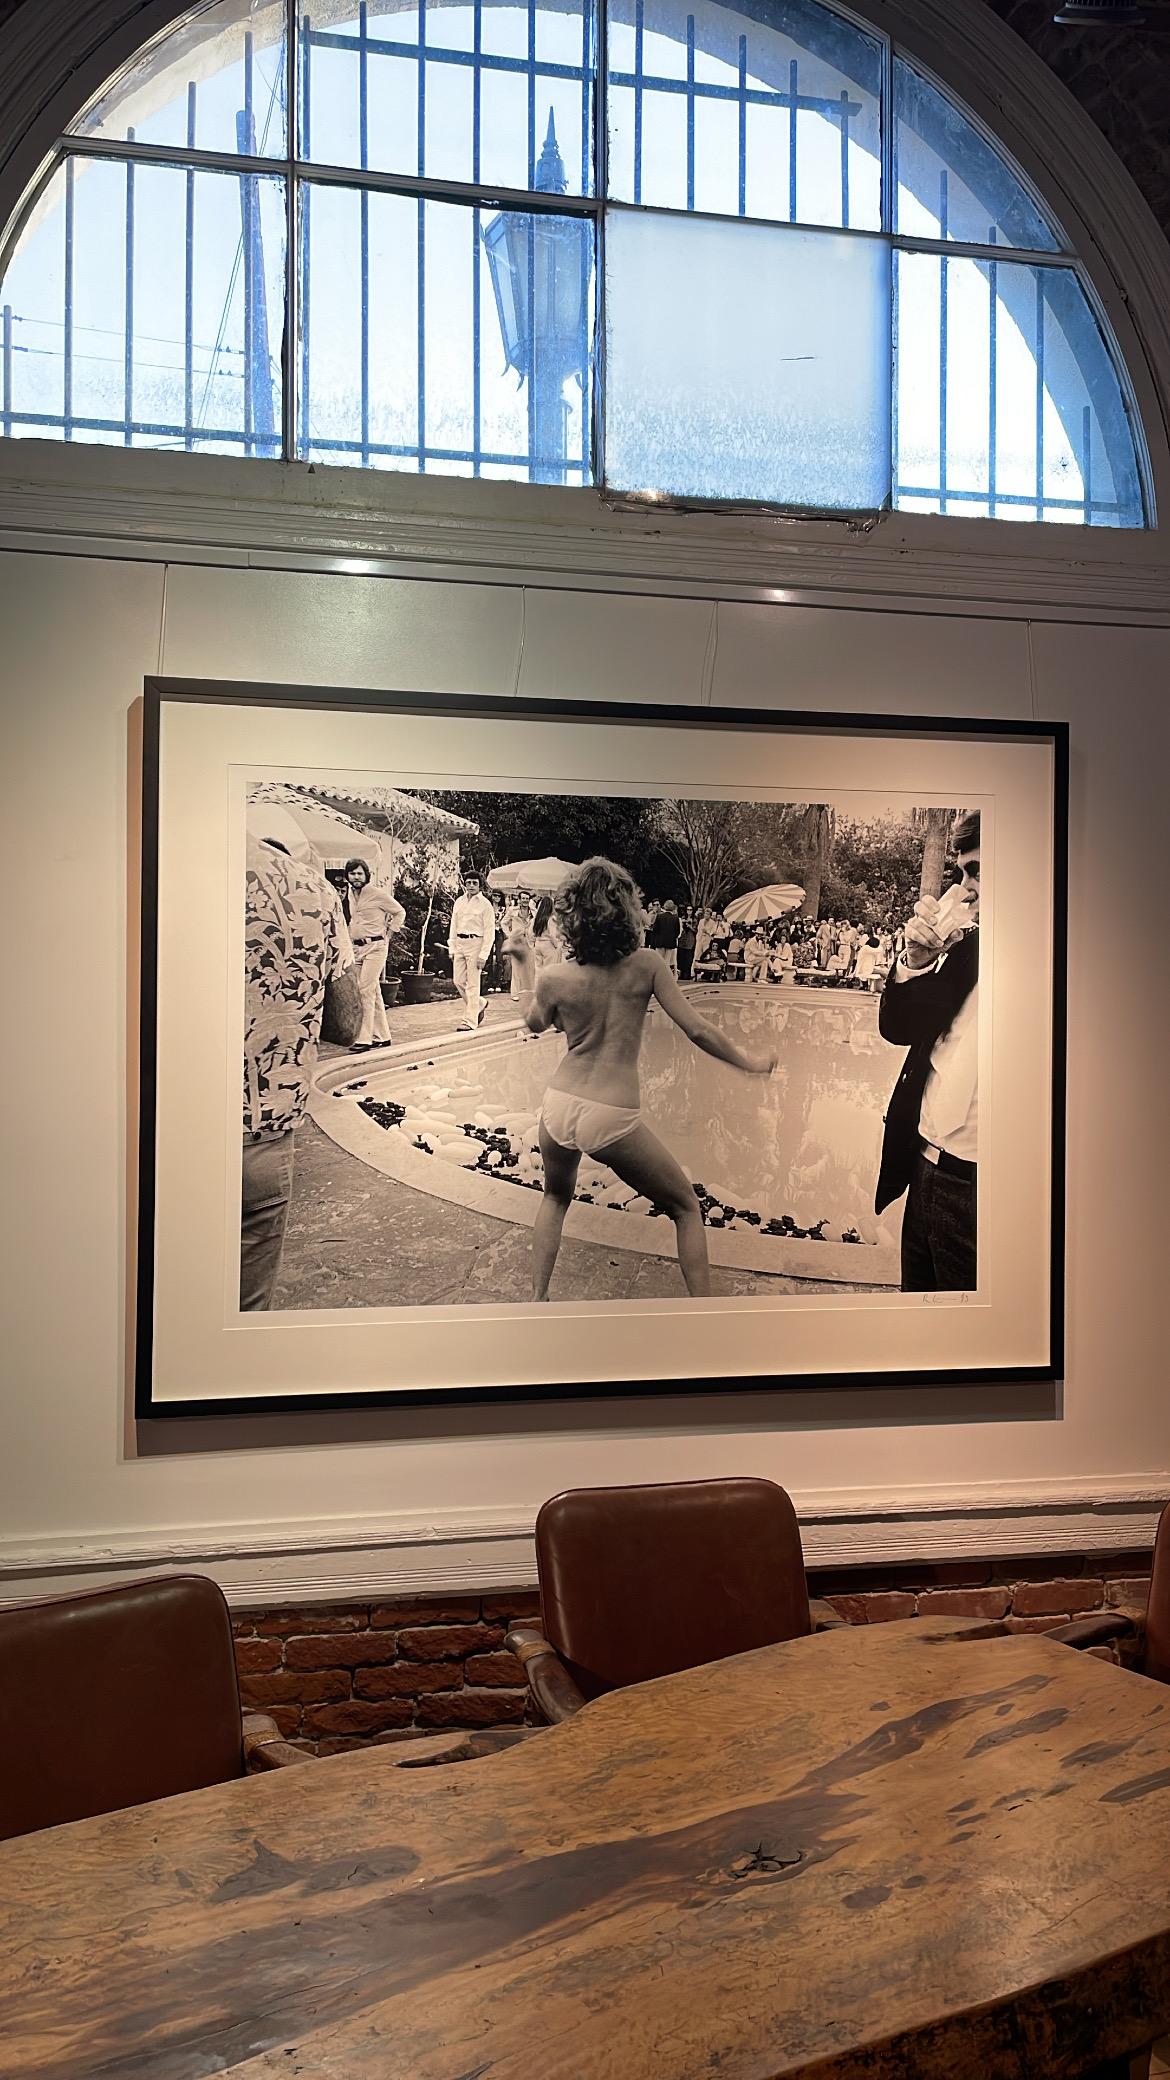 Beverly Hills Swim Party, 1977

Archival Digital Print 
Limited Edition 1/3
Hand-Signed and Numbered by Brad Elterman
(40